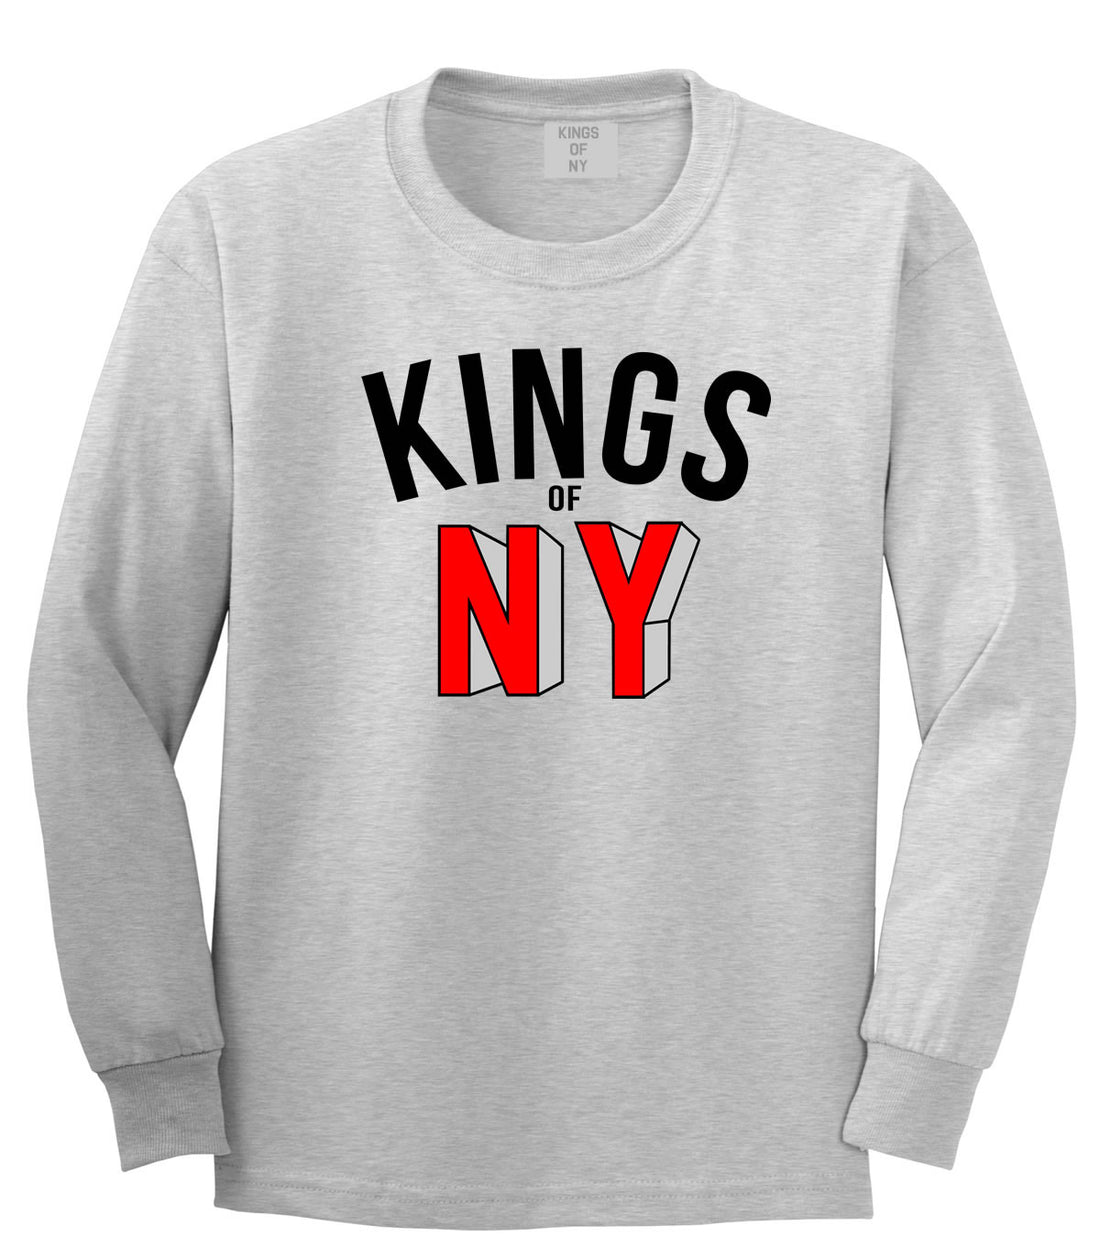 NY Red Block Letter Printed Long Sleeve T-Shirt in Grey by Kings Of NY